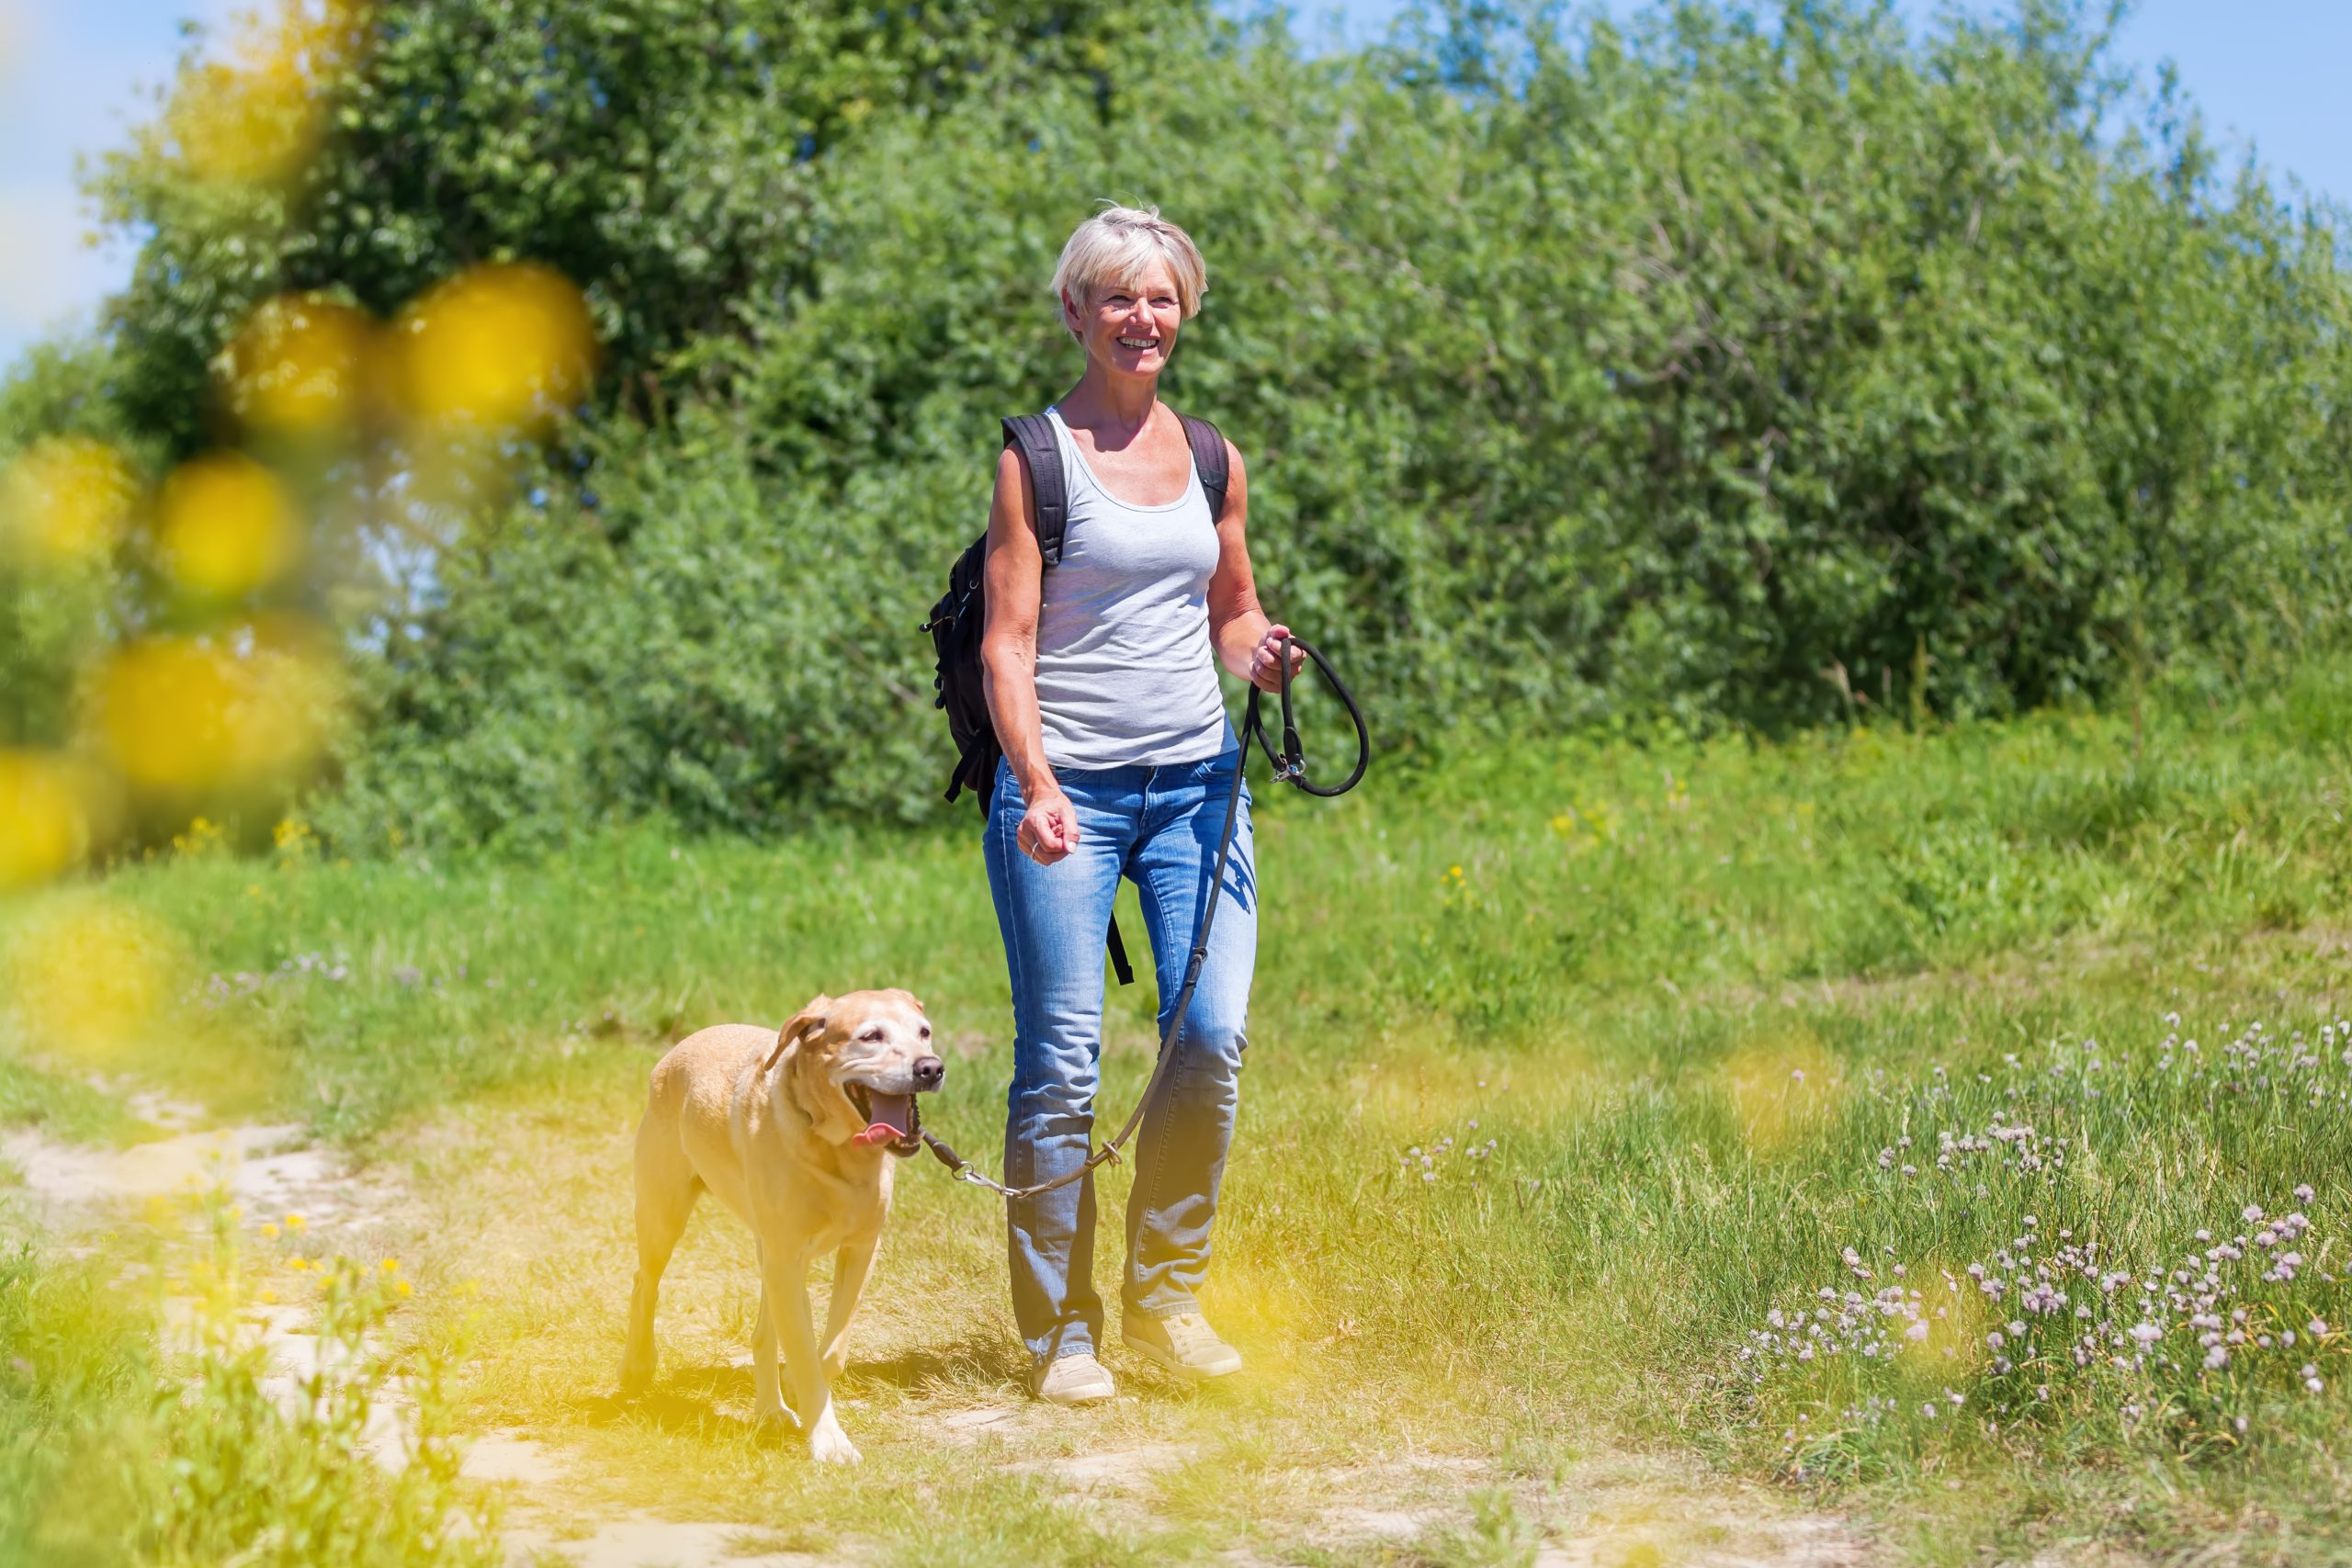 A woman with diabetes, hammer toes, and bunions happily walking her dog, showing that with the right fit of footwear, one can still enjoy daily activities and maintain an active lifestyle.